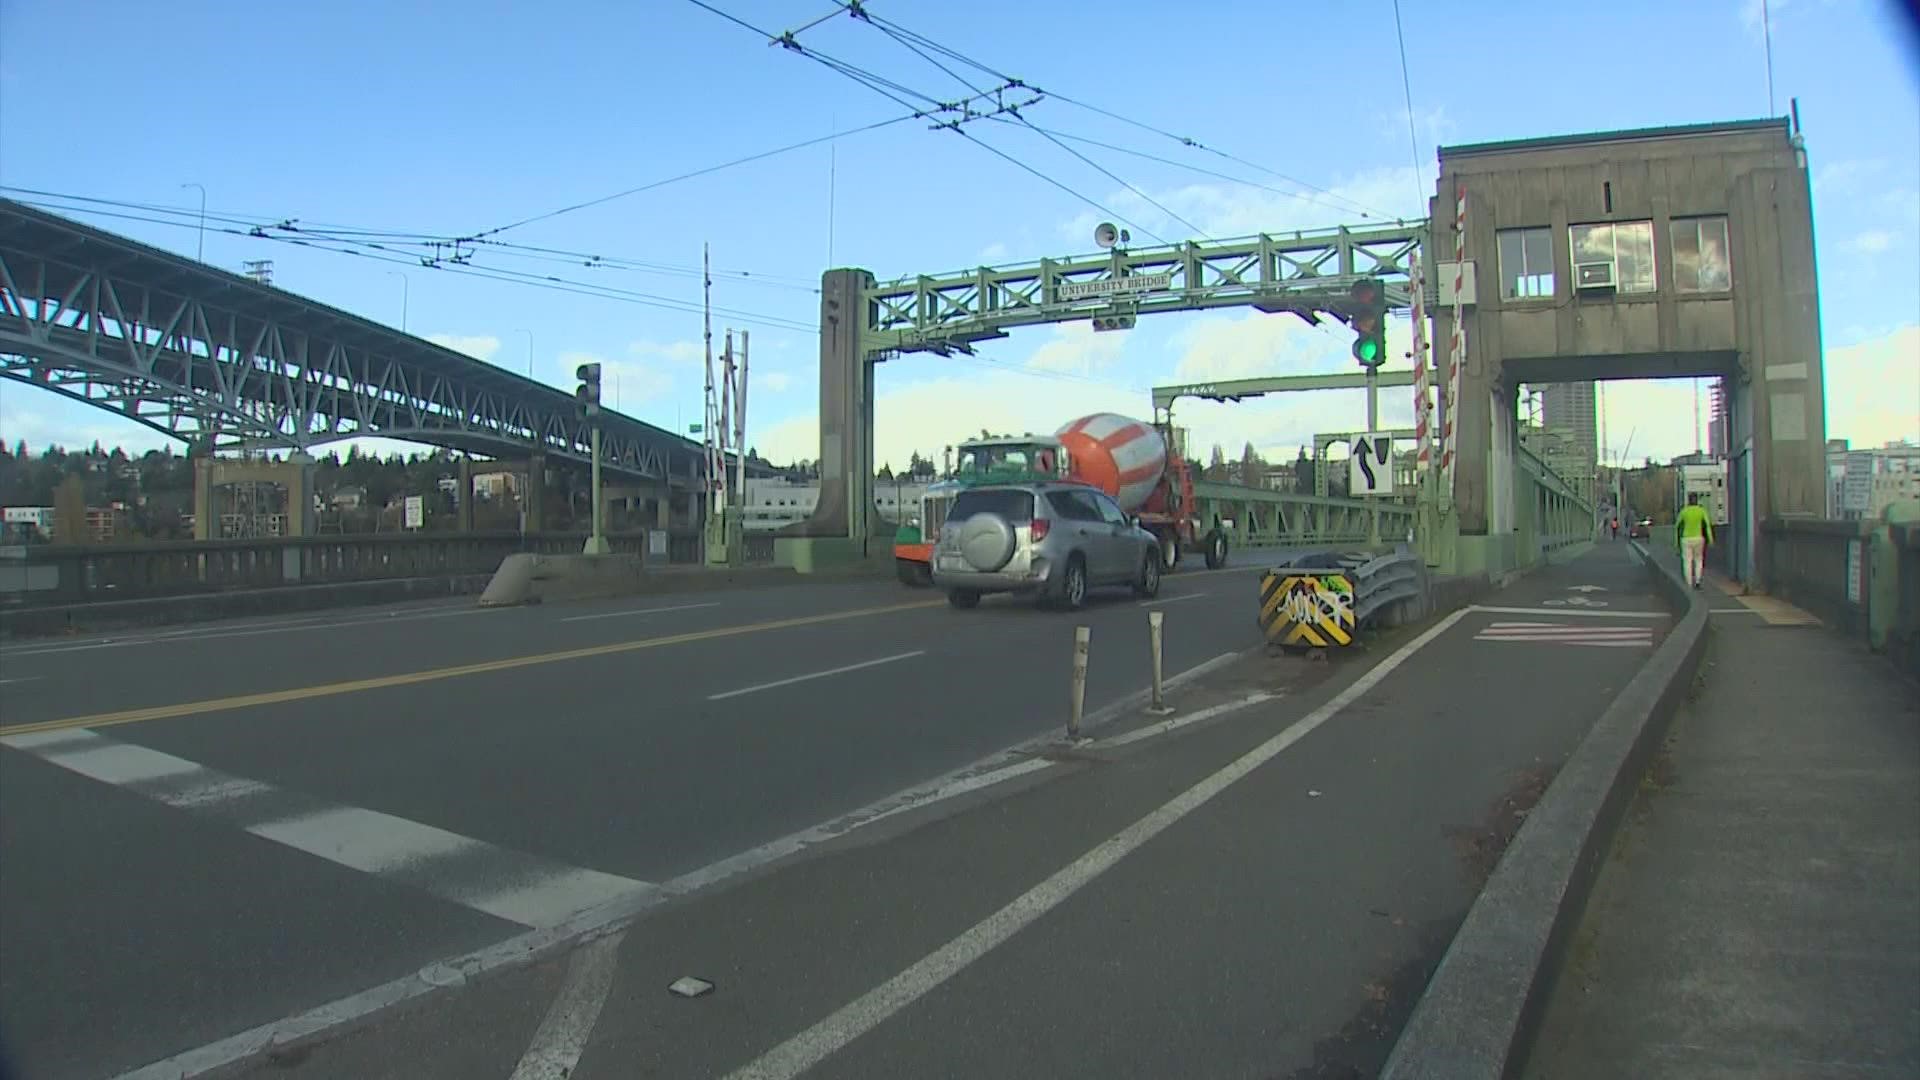 The University Bridge, which connects the U District to Eastlake, was stuck upright during the Friday evening commute and Saturday Husky game.